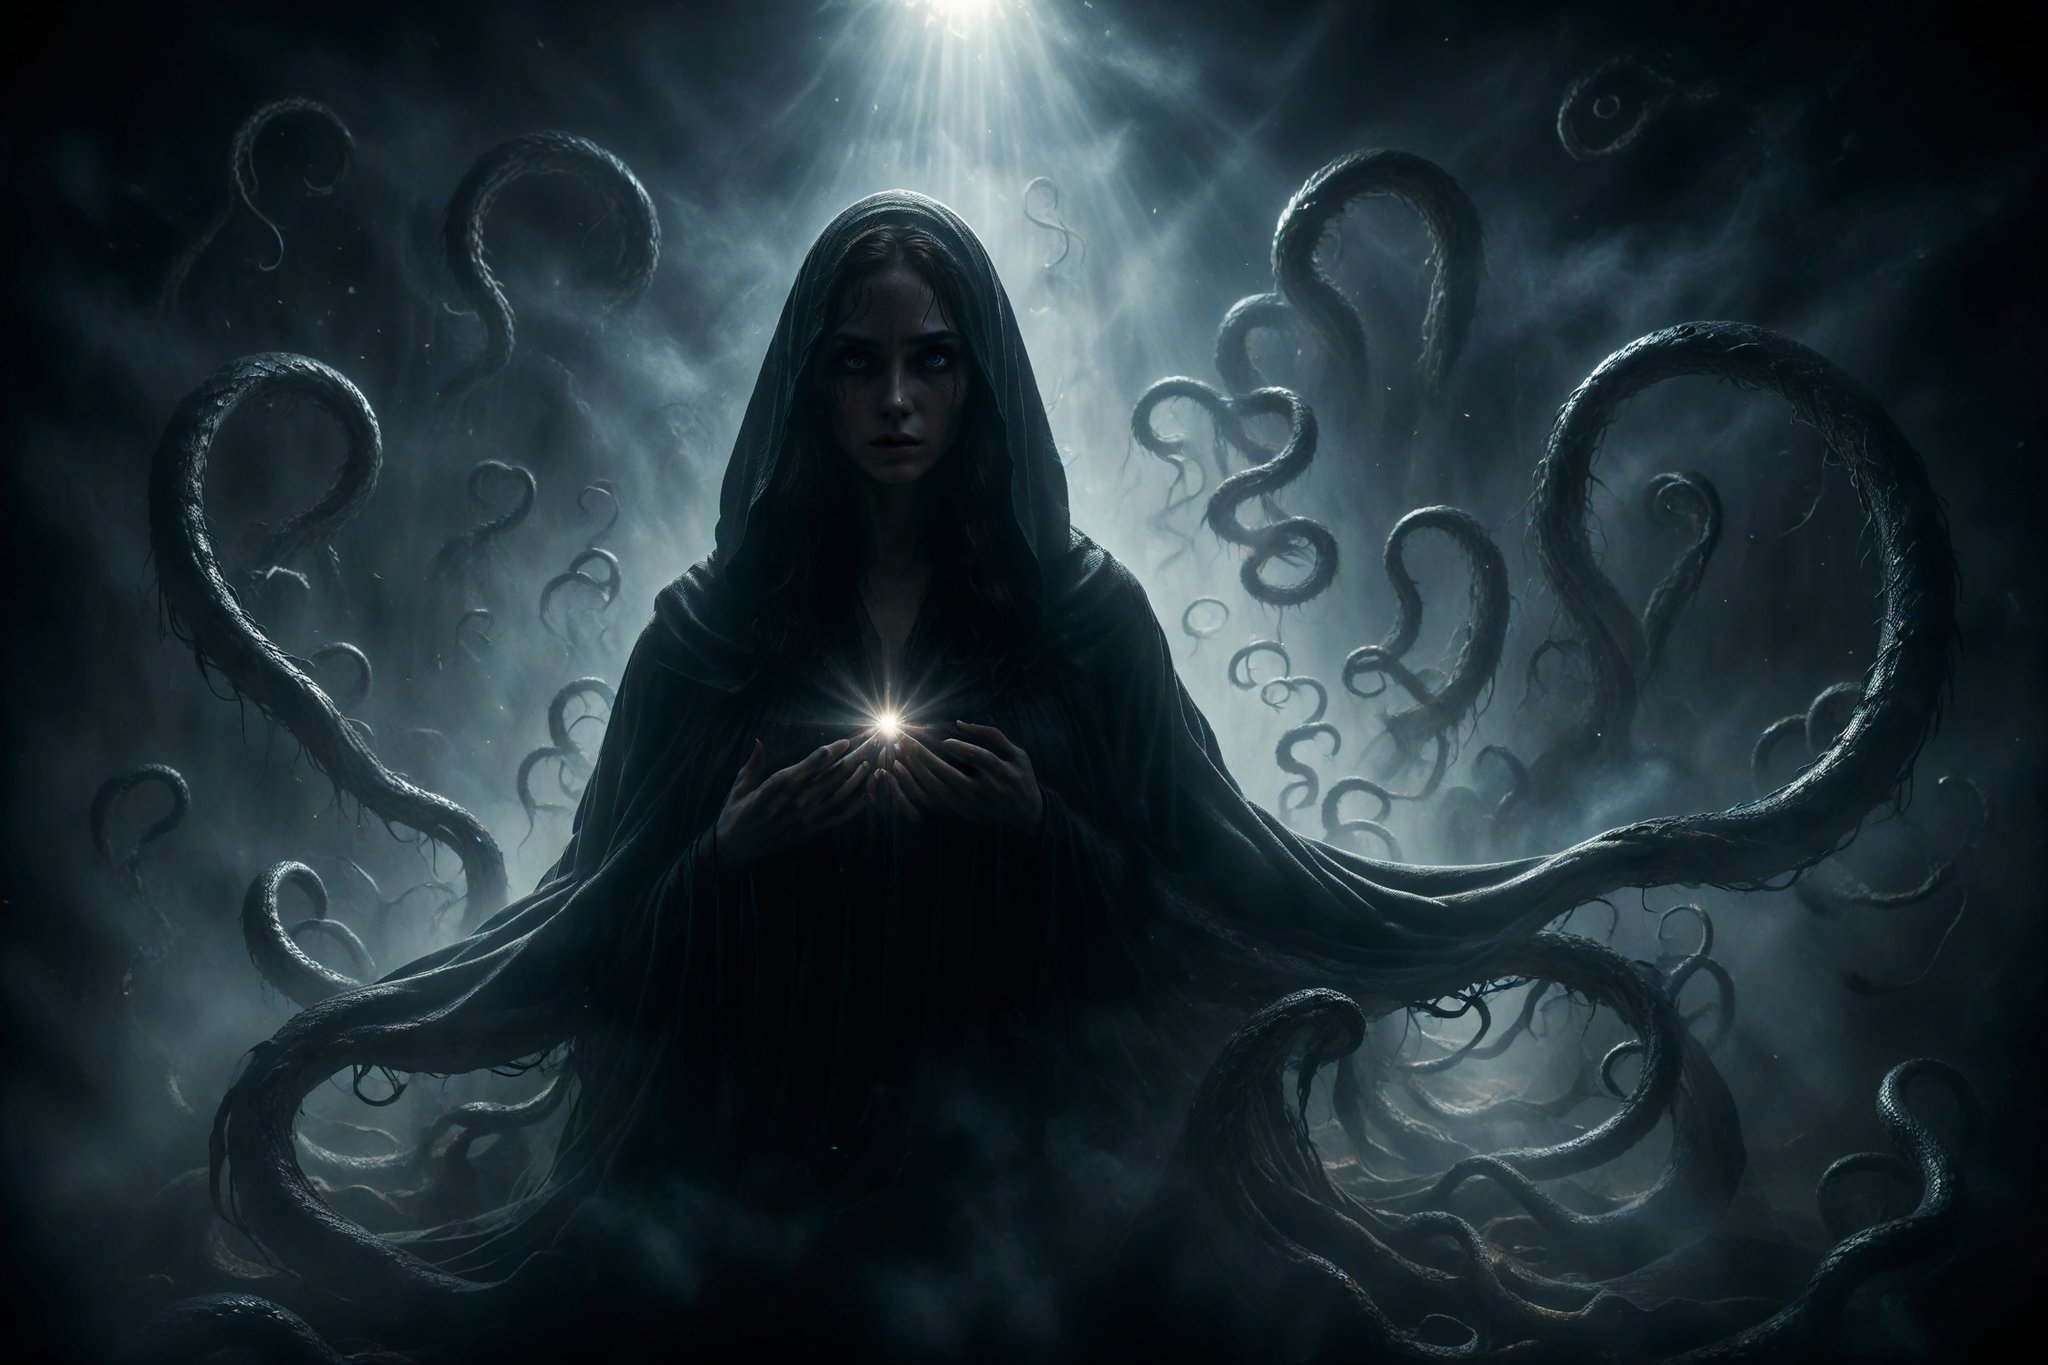 A female figure draped in a dark cloak, with eyes shining with a cold, mysterious light, manipulating shadows twisting like serpents around her.